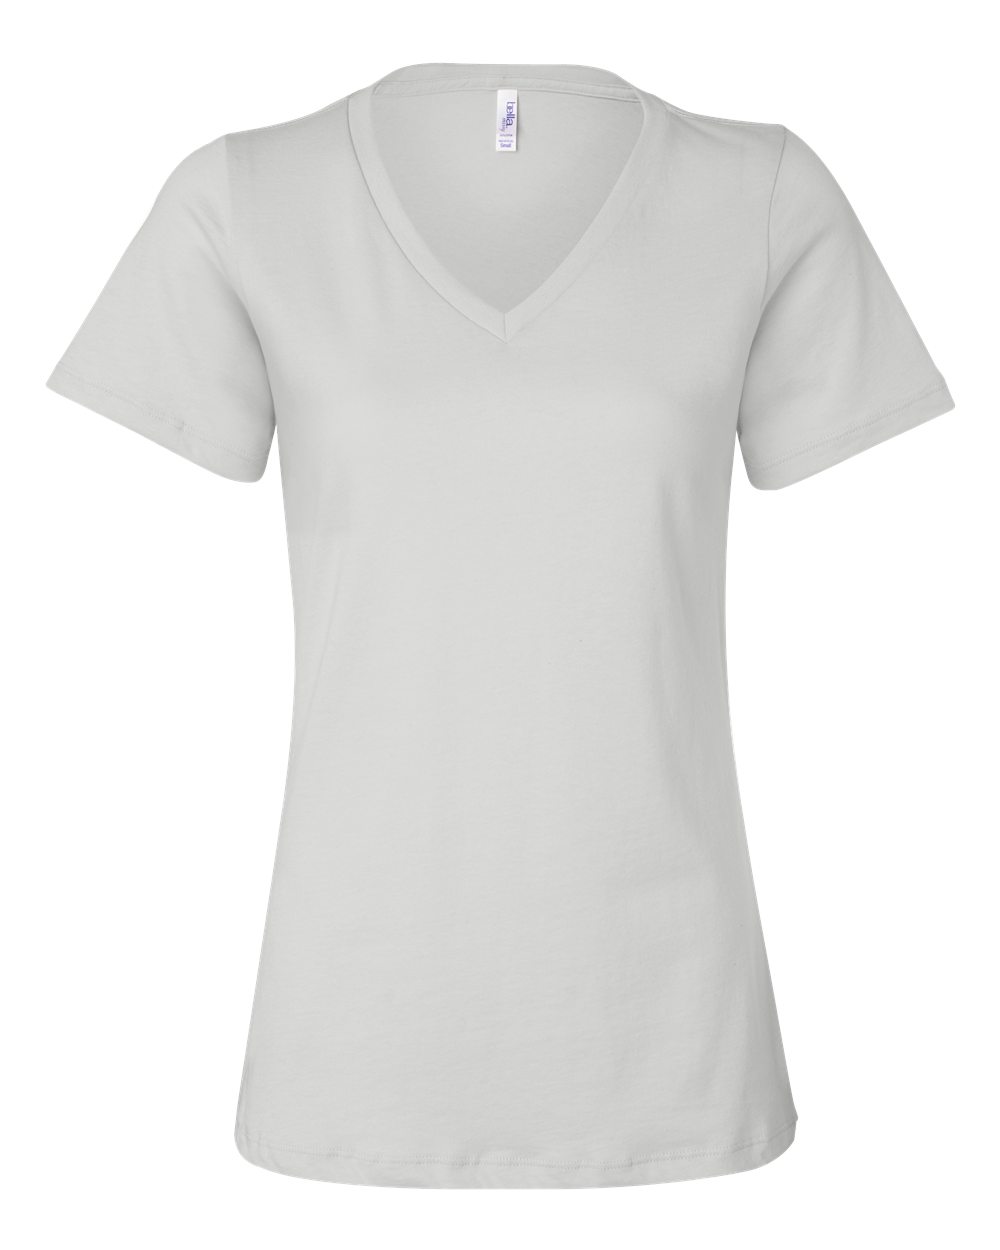 bella+canvas womens relaxed v-neck tee white